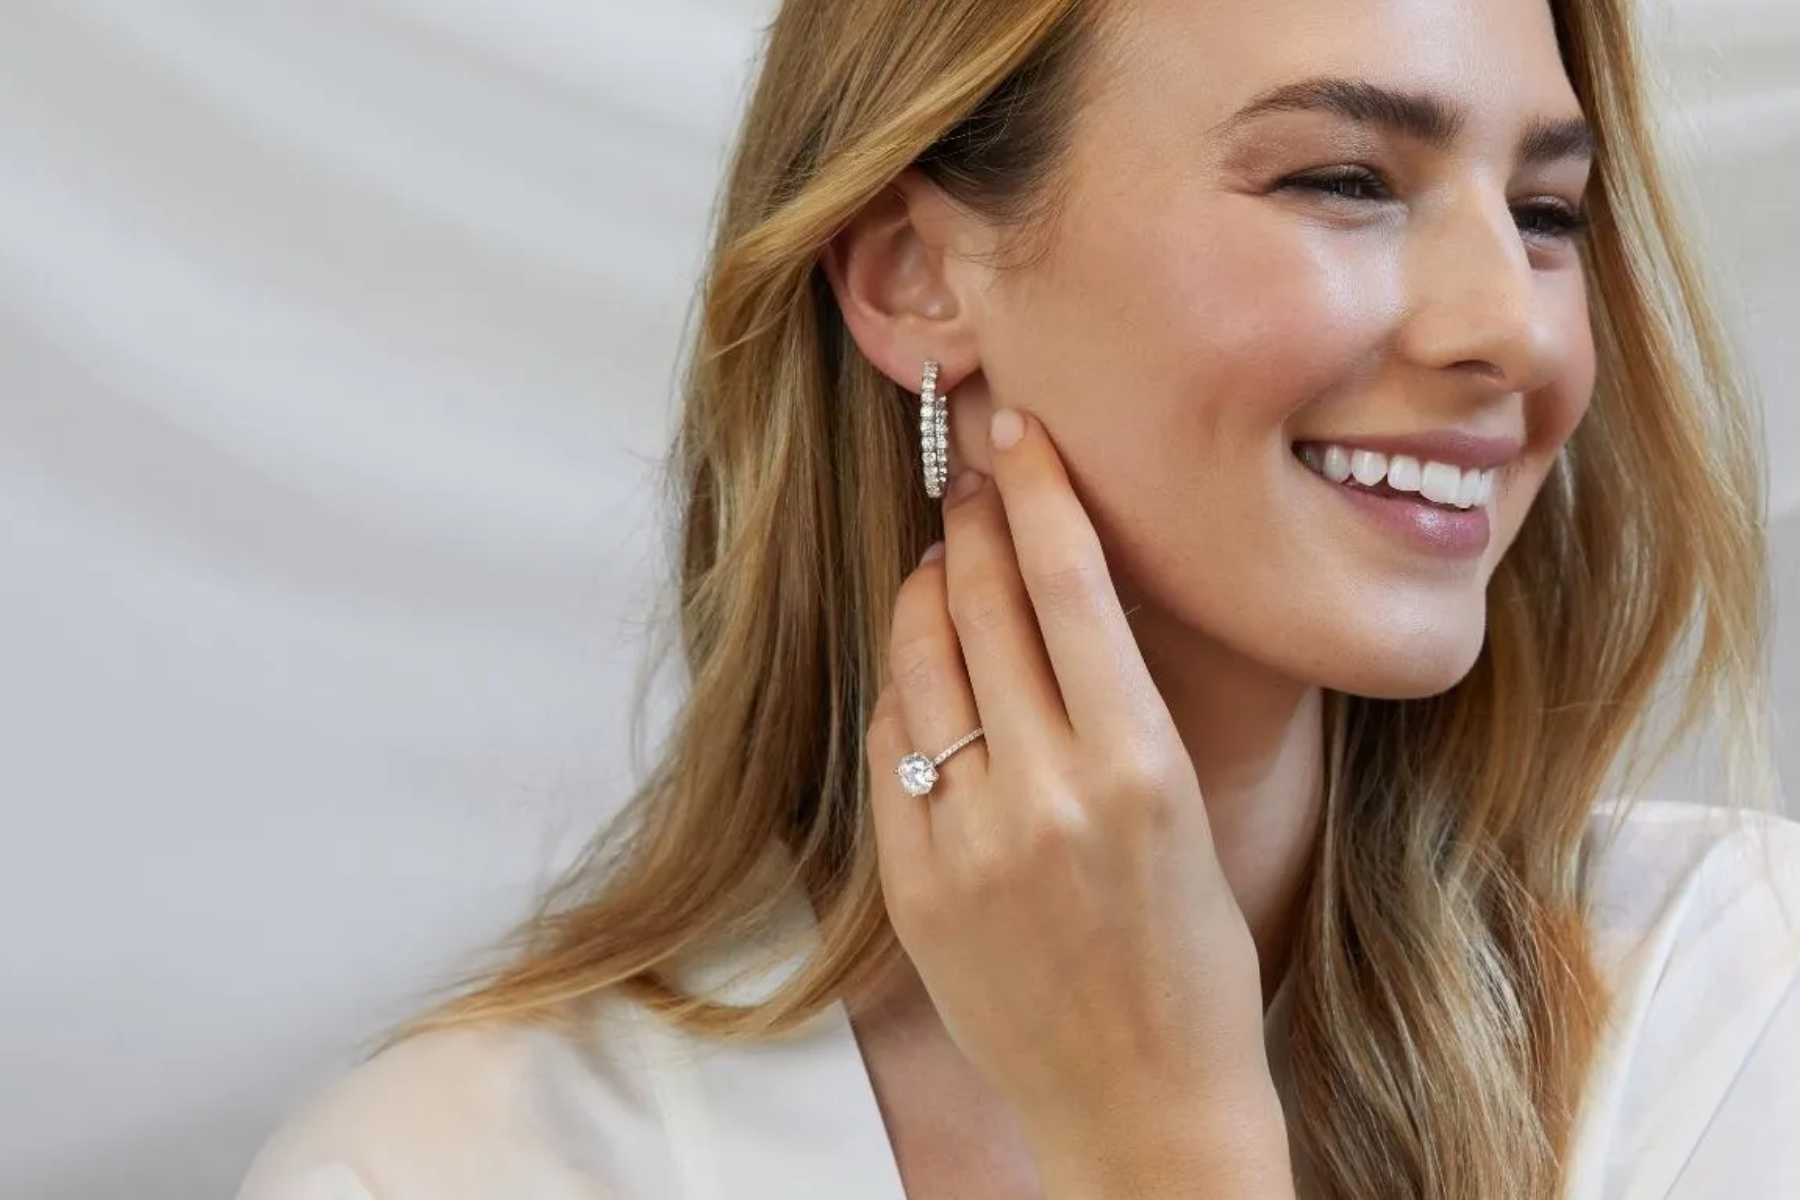 A woman smiles while wearing a simple wedding band with a large diamond stone